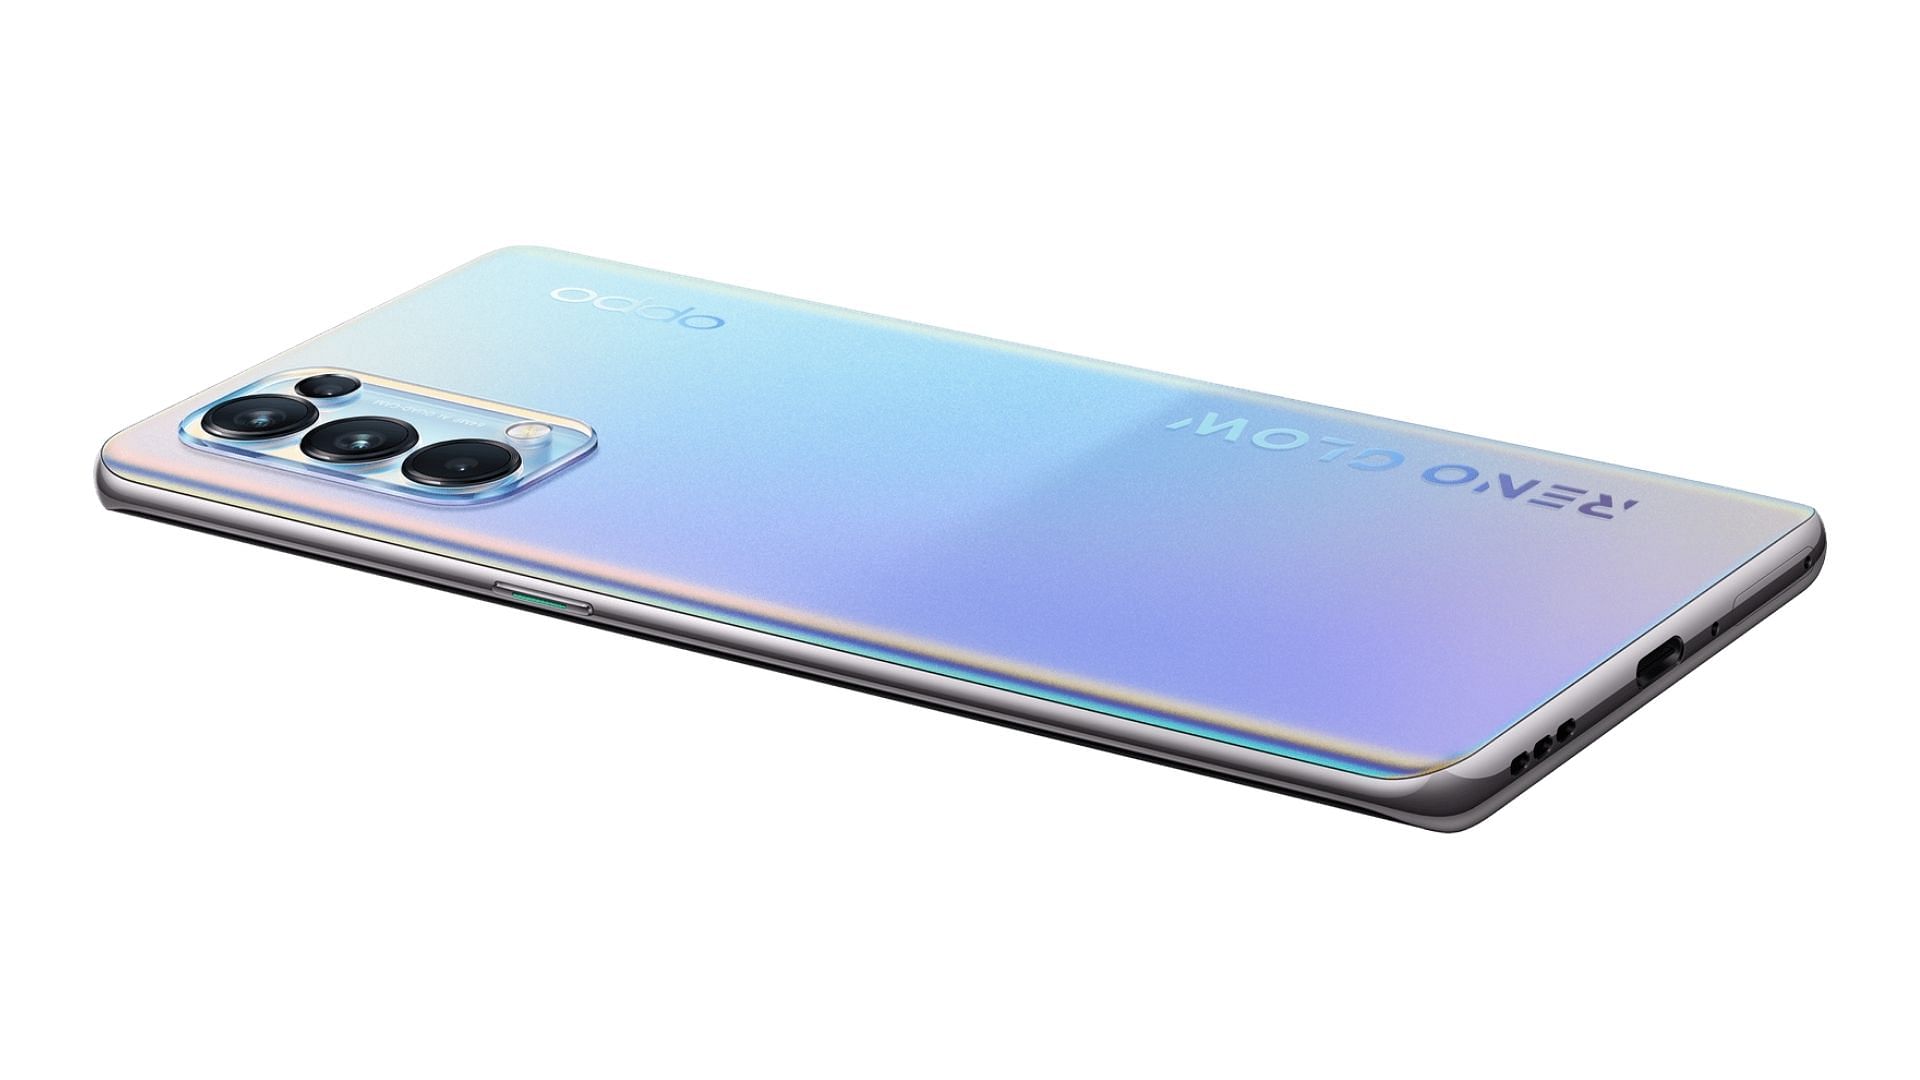 The OPPO Reno 5 Pro is expected to come to India soon.